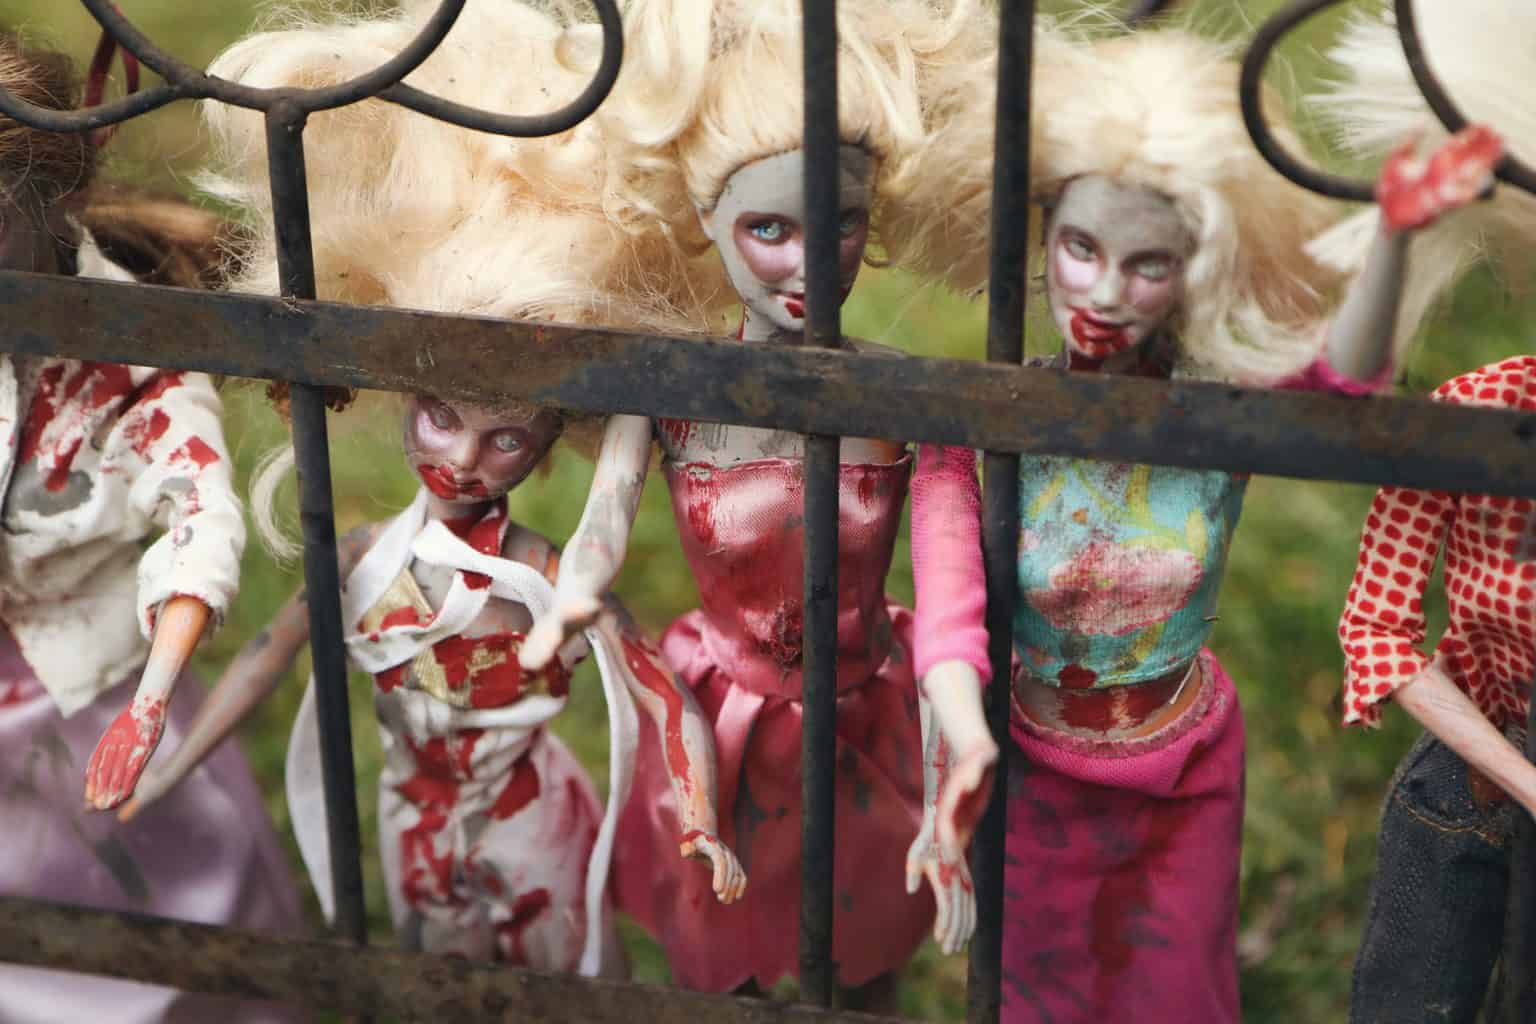 Scary looking dolls displayed on rusty fence